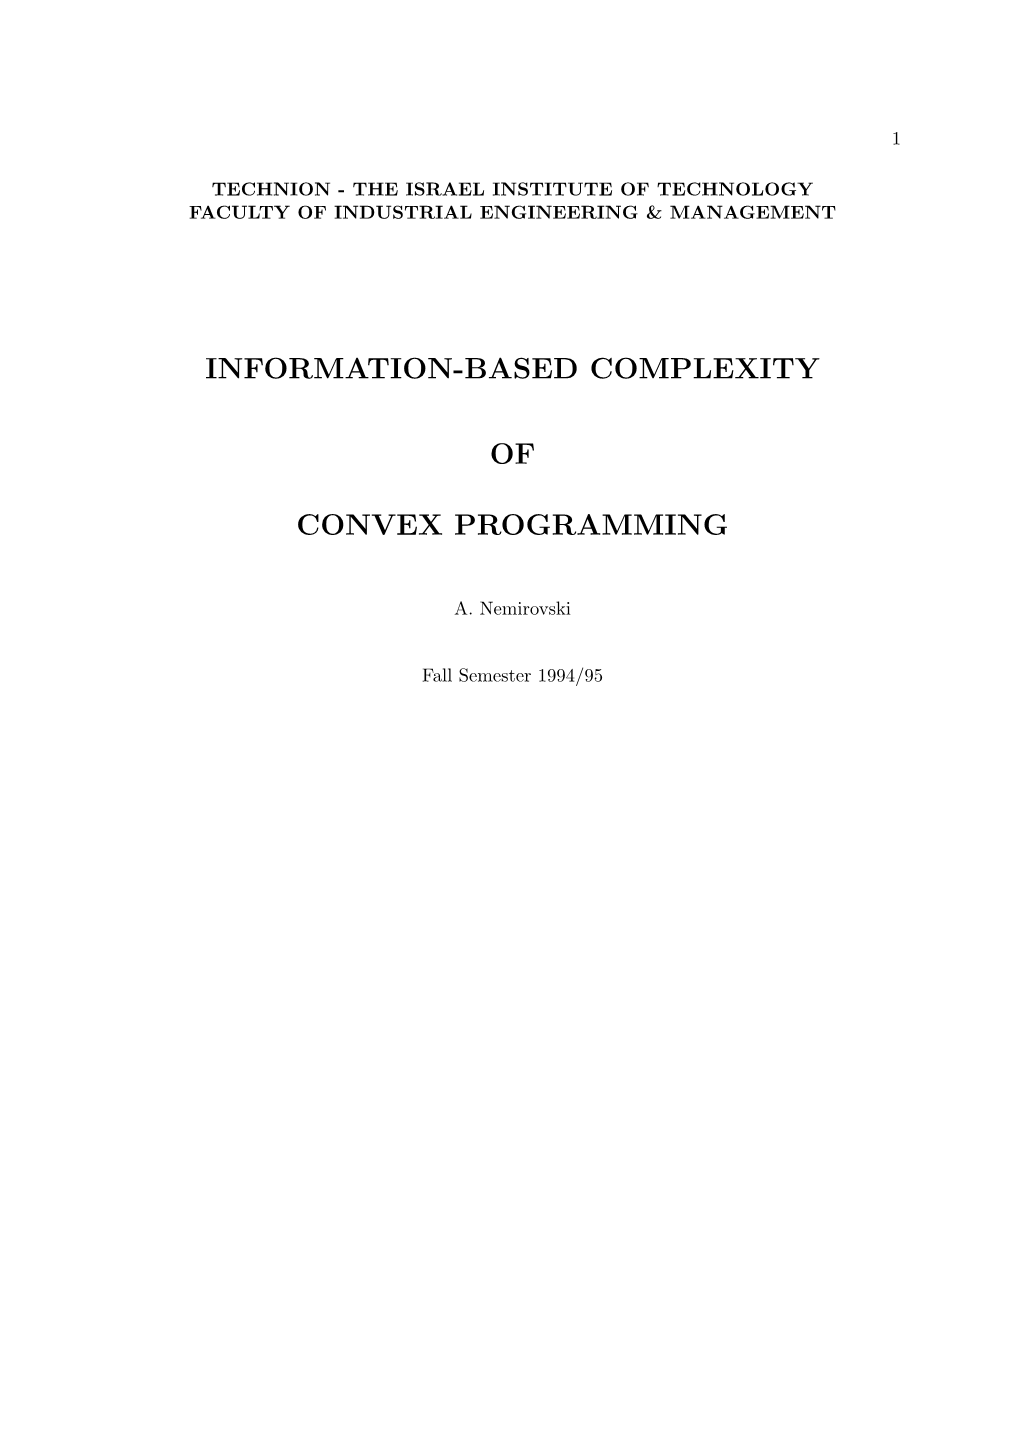 Information-Based Complexity of Convex Programming